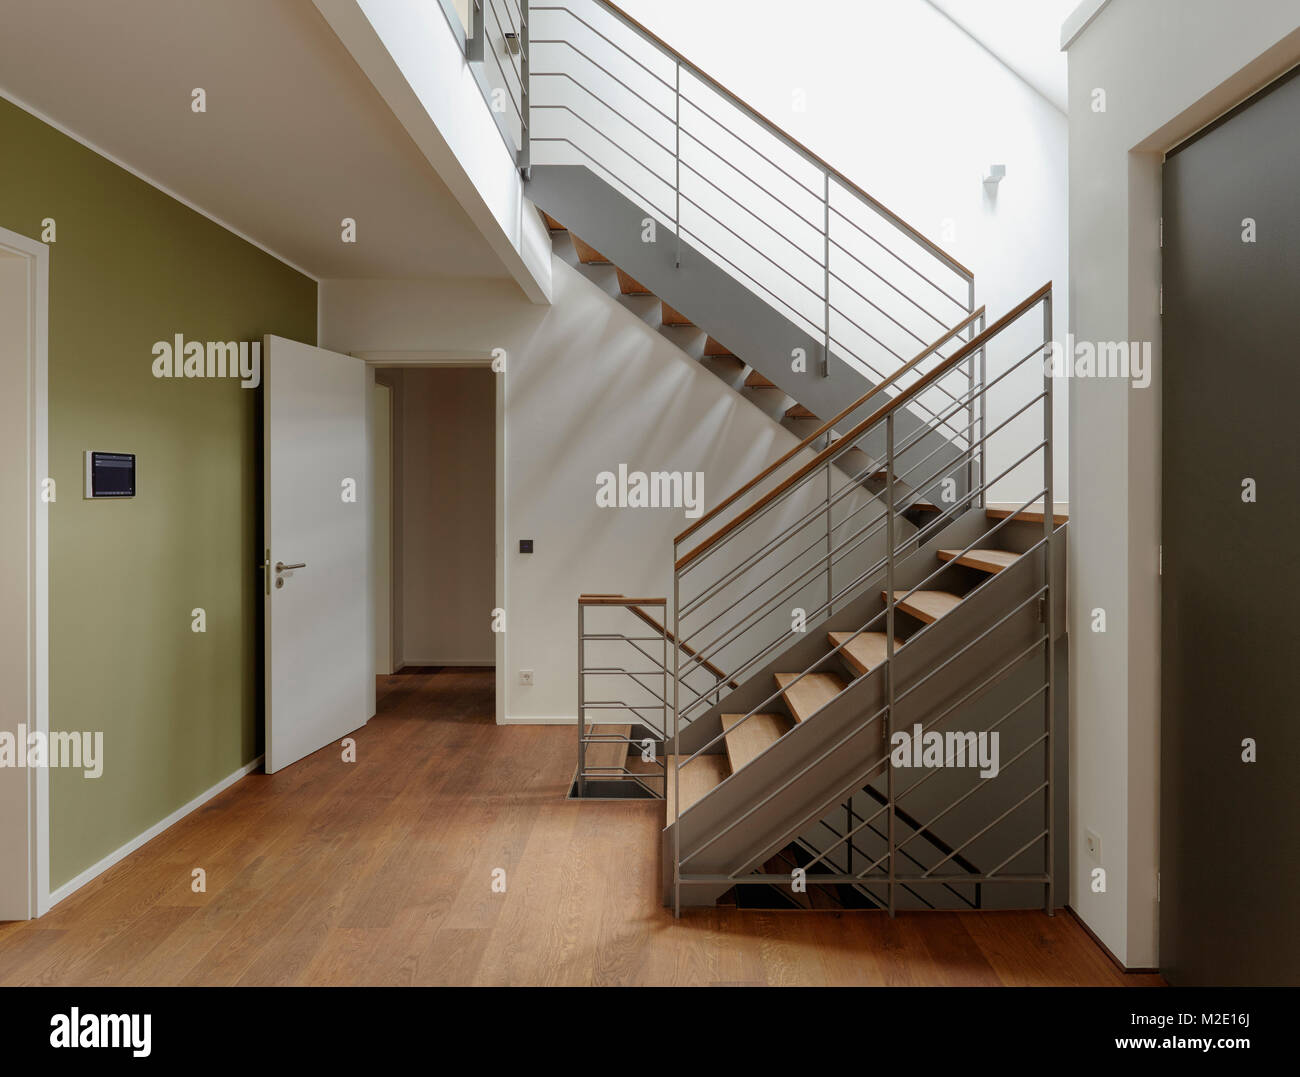 Plank floor and staircase in home Stock Photo